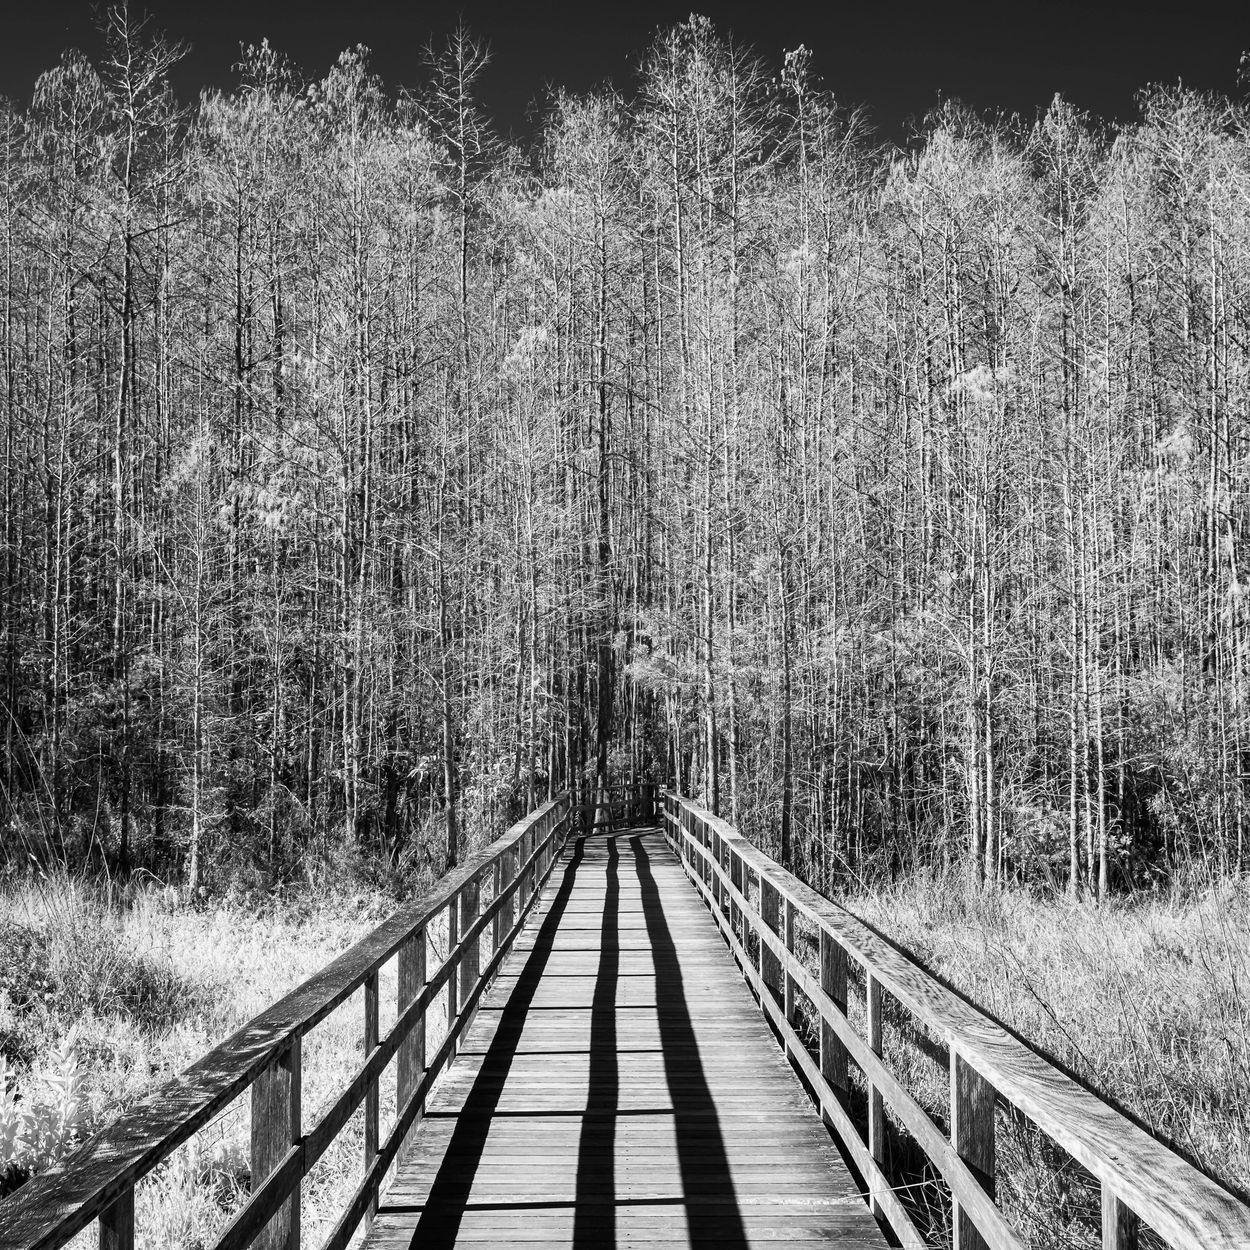 Infrared image of the boardwalk at Corkscrew Sanctuary, Naples, Florida.